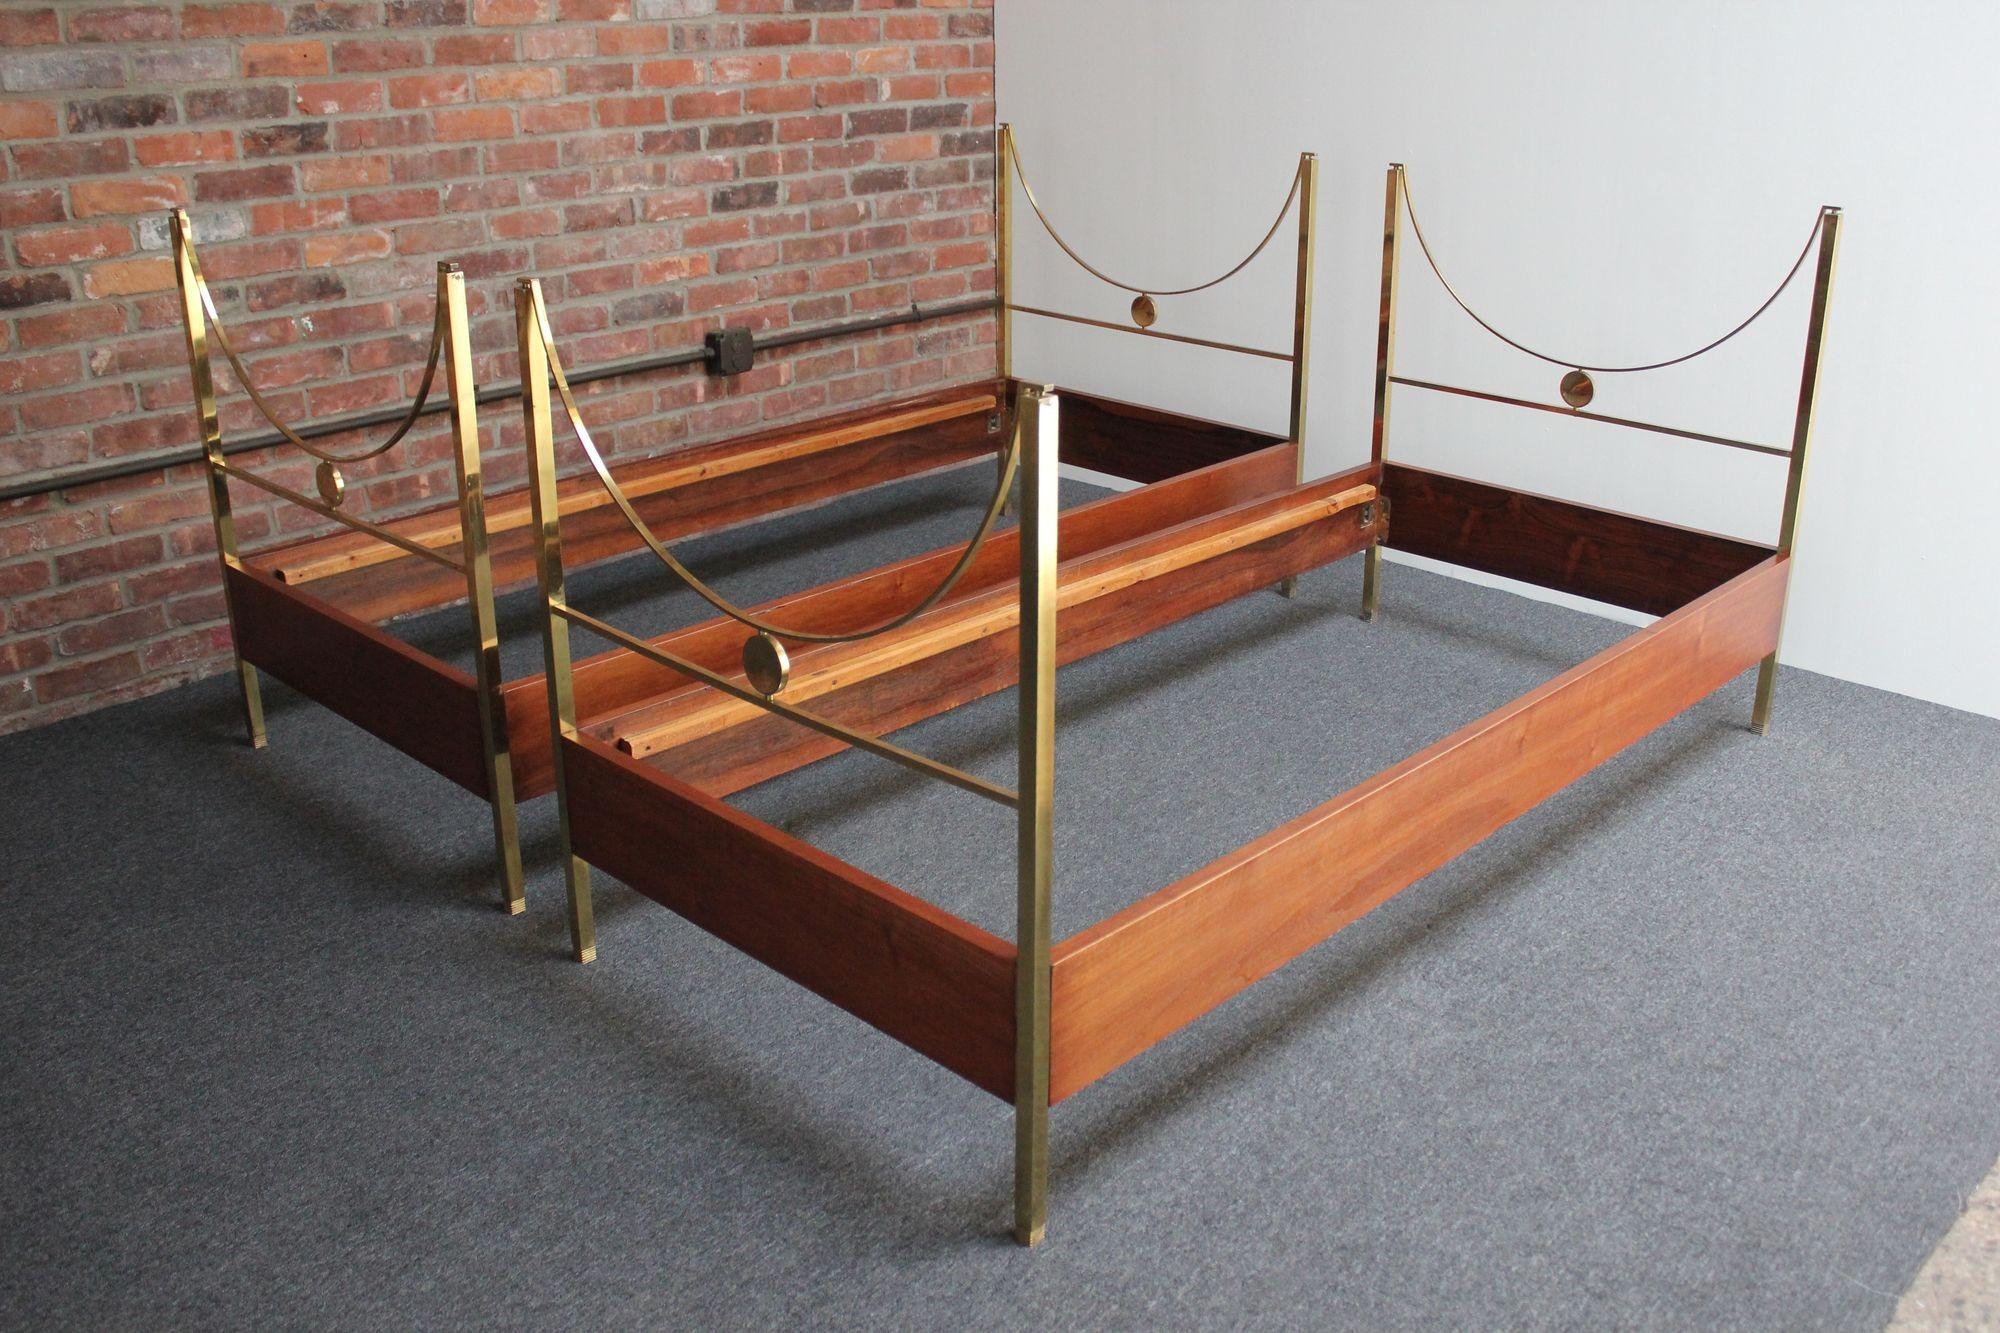 Pair of Vintage Italian Mahogany and Brass Beds by Carlo de Carli for Sormani For Sale 12